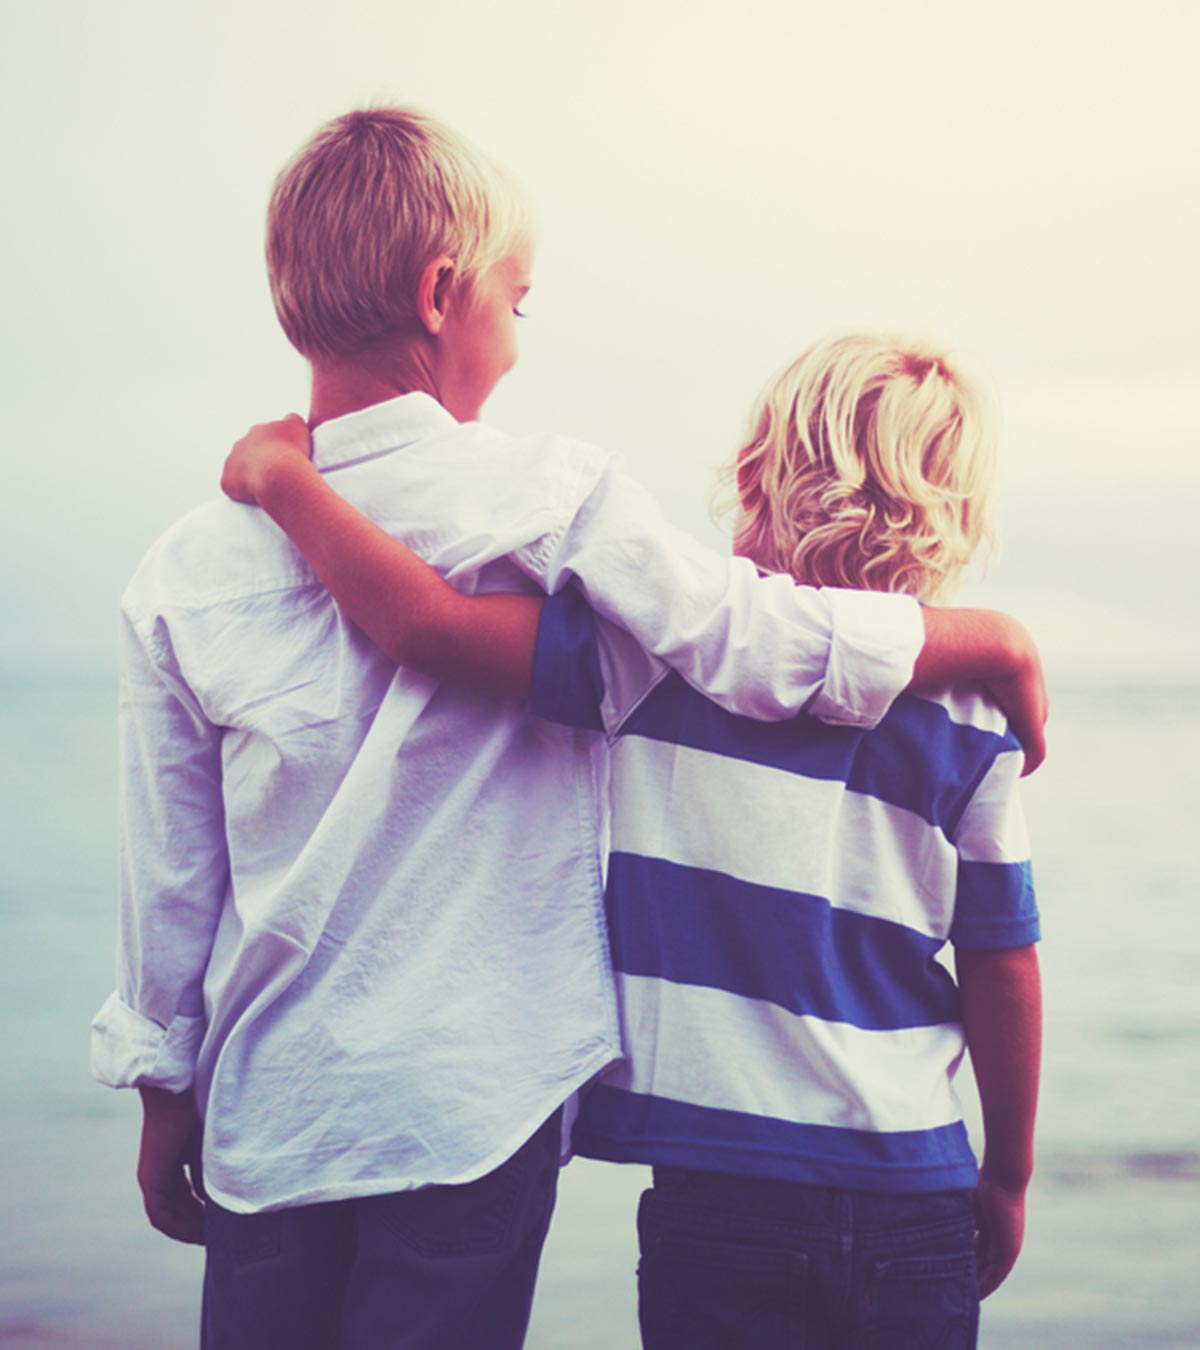 151 Best Brother Quotes & Sayings To Express Your Love